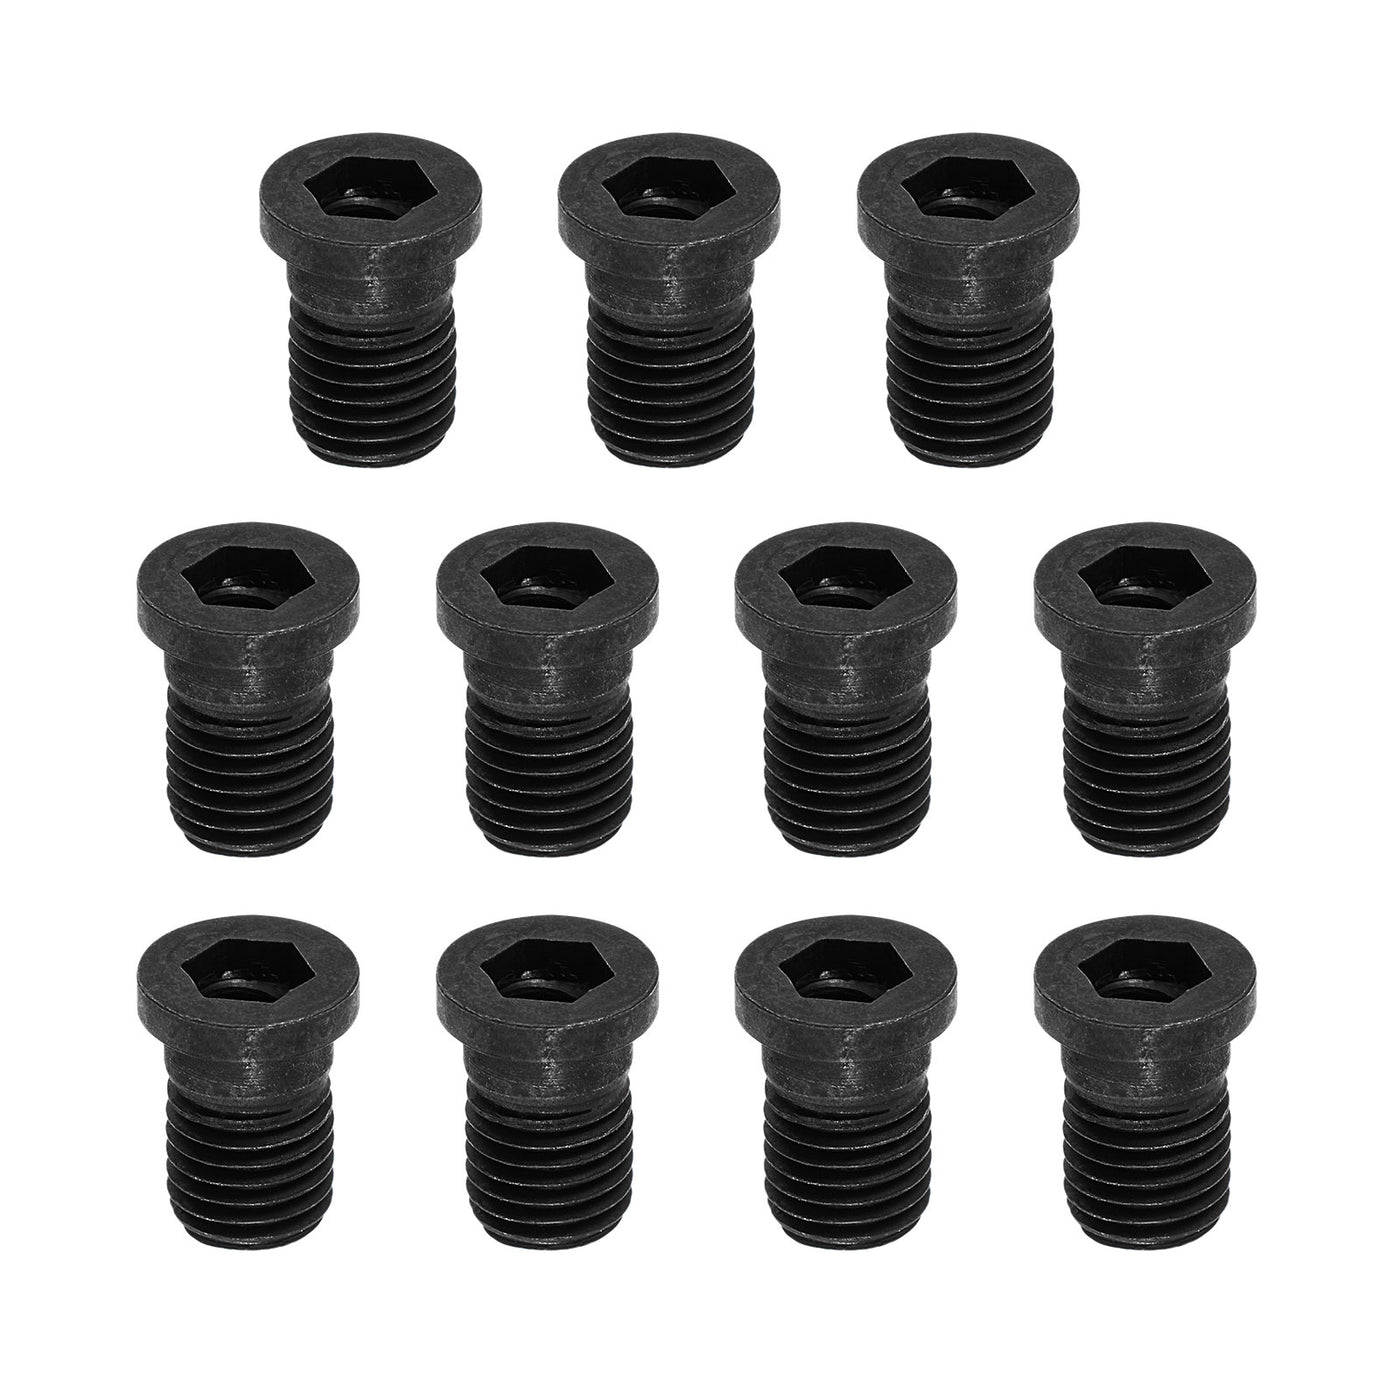 uxcell Uxcell M6x10-0.75 Set Screws for Carbide Insert CNC Lathe Turning Tool Holder, 10Pcs